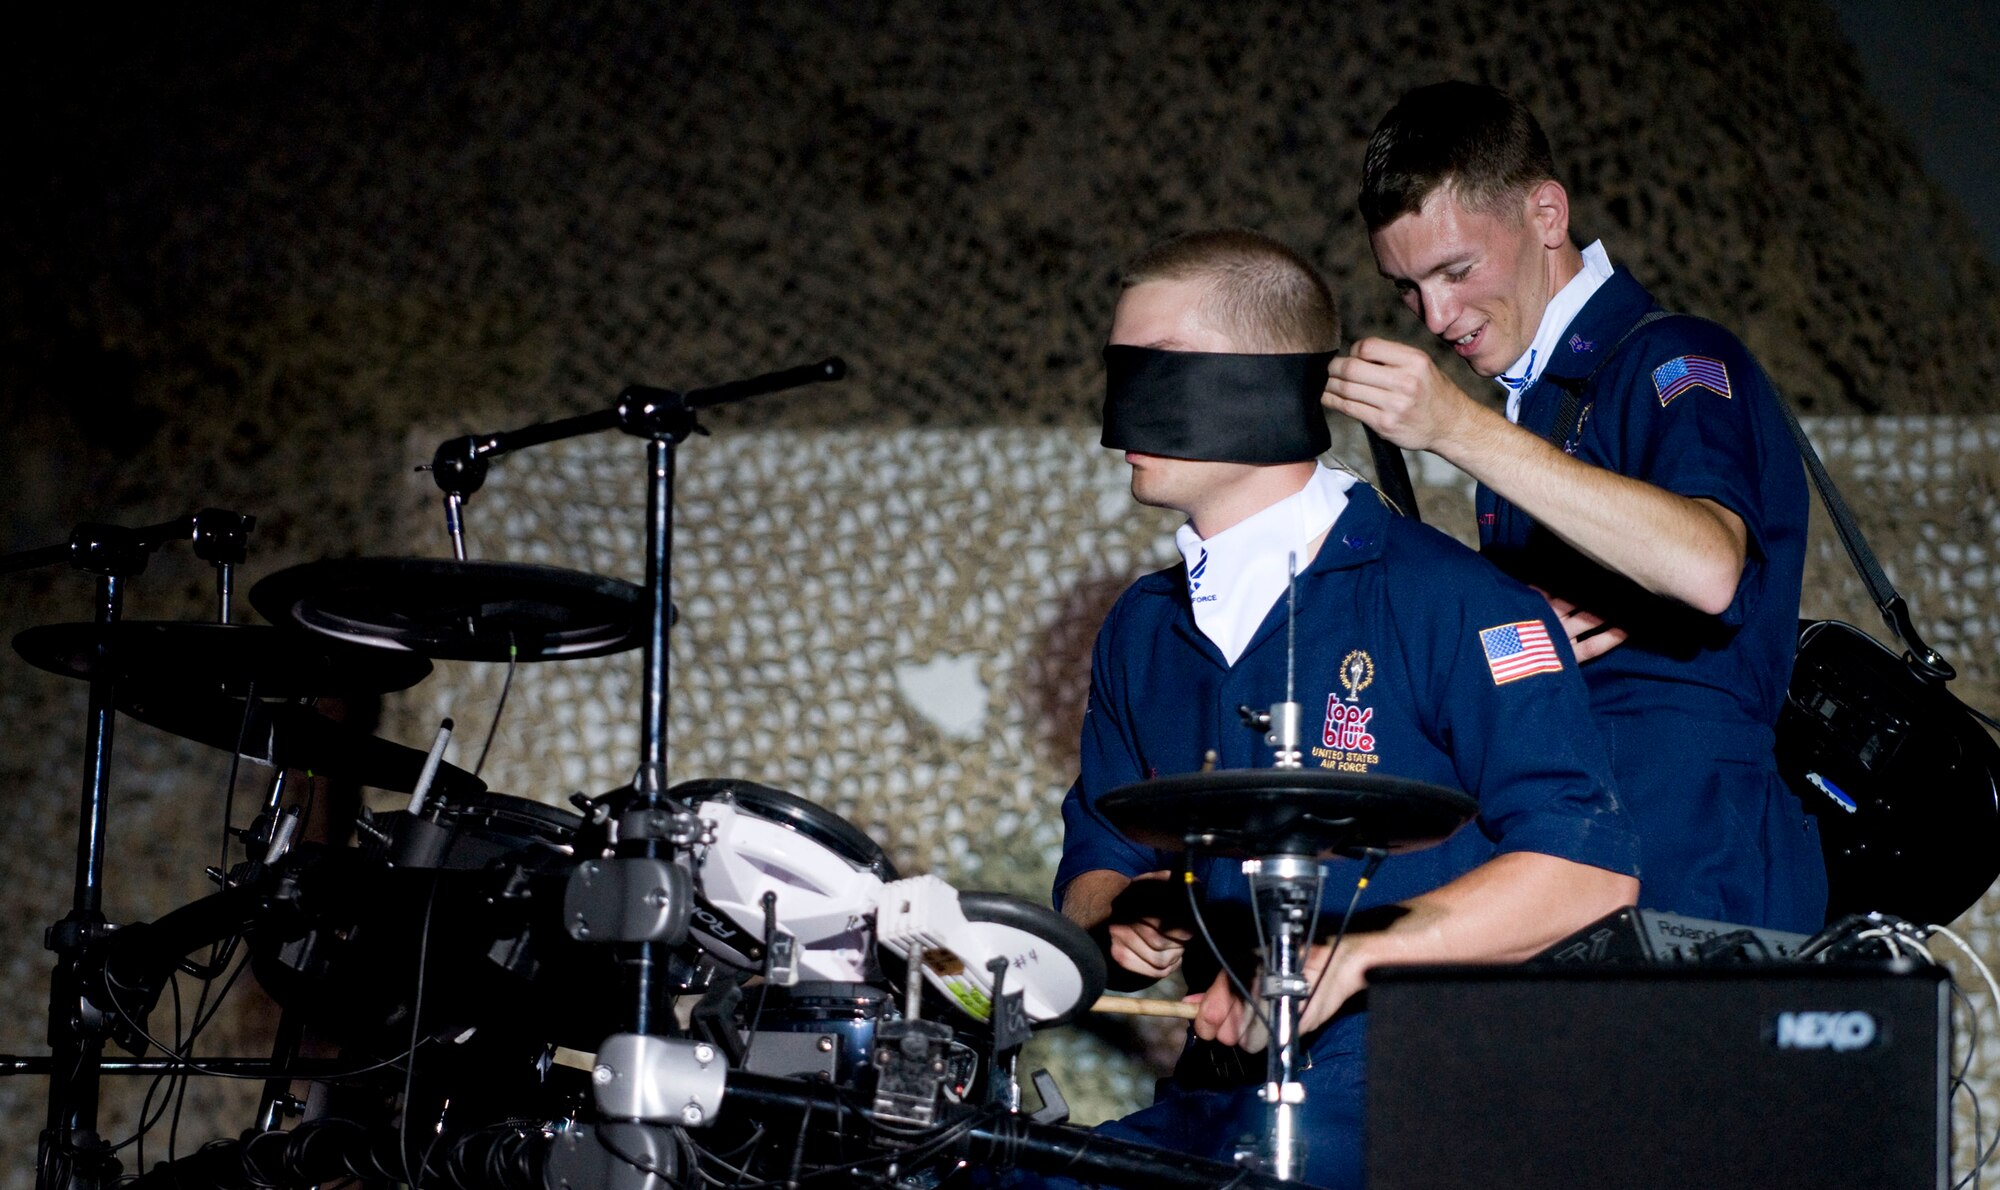 BAGRAM AIR FIELD, Afghanistan -- Senior Airman David Leatherwood, guitarist for Tops in Blue, blindfolds drummer Airman 1st Class Jaron Seuis during his drum solo here on July 13, 2008. Airman Seuis proceeded to showcase is drumming talent by continuing the solo blind. Airman Seuis is an aerospace propulsion journeyman for the 116th Maintenance Squadron, Robins Air Force Base, Ga., and hails from Ocala, Fla. (U.S. Air Force photo by Staff Sgt. Samuel Morse)